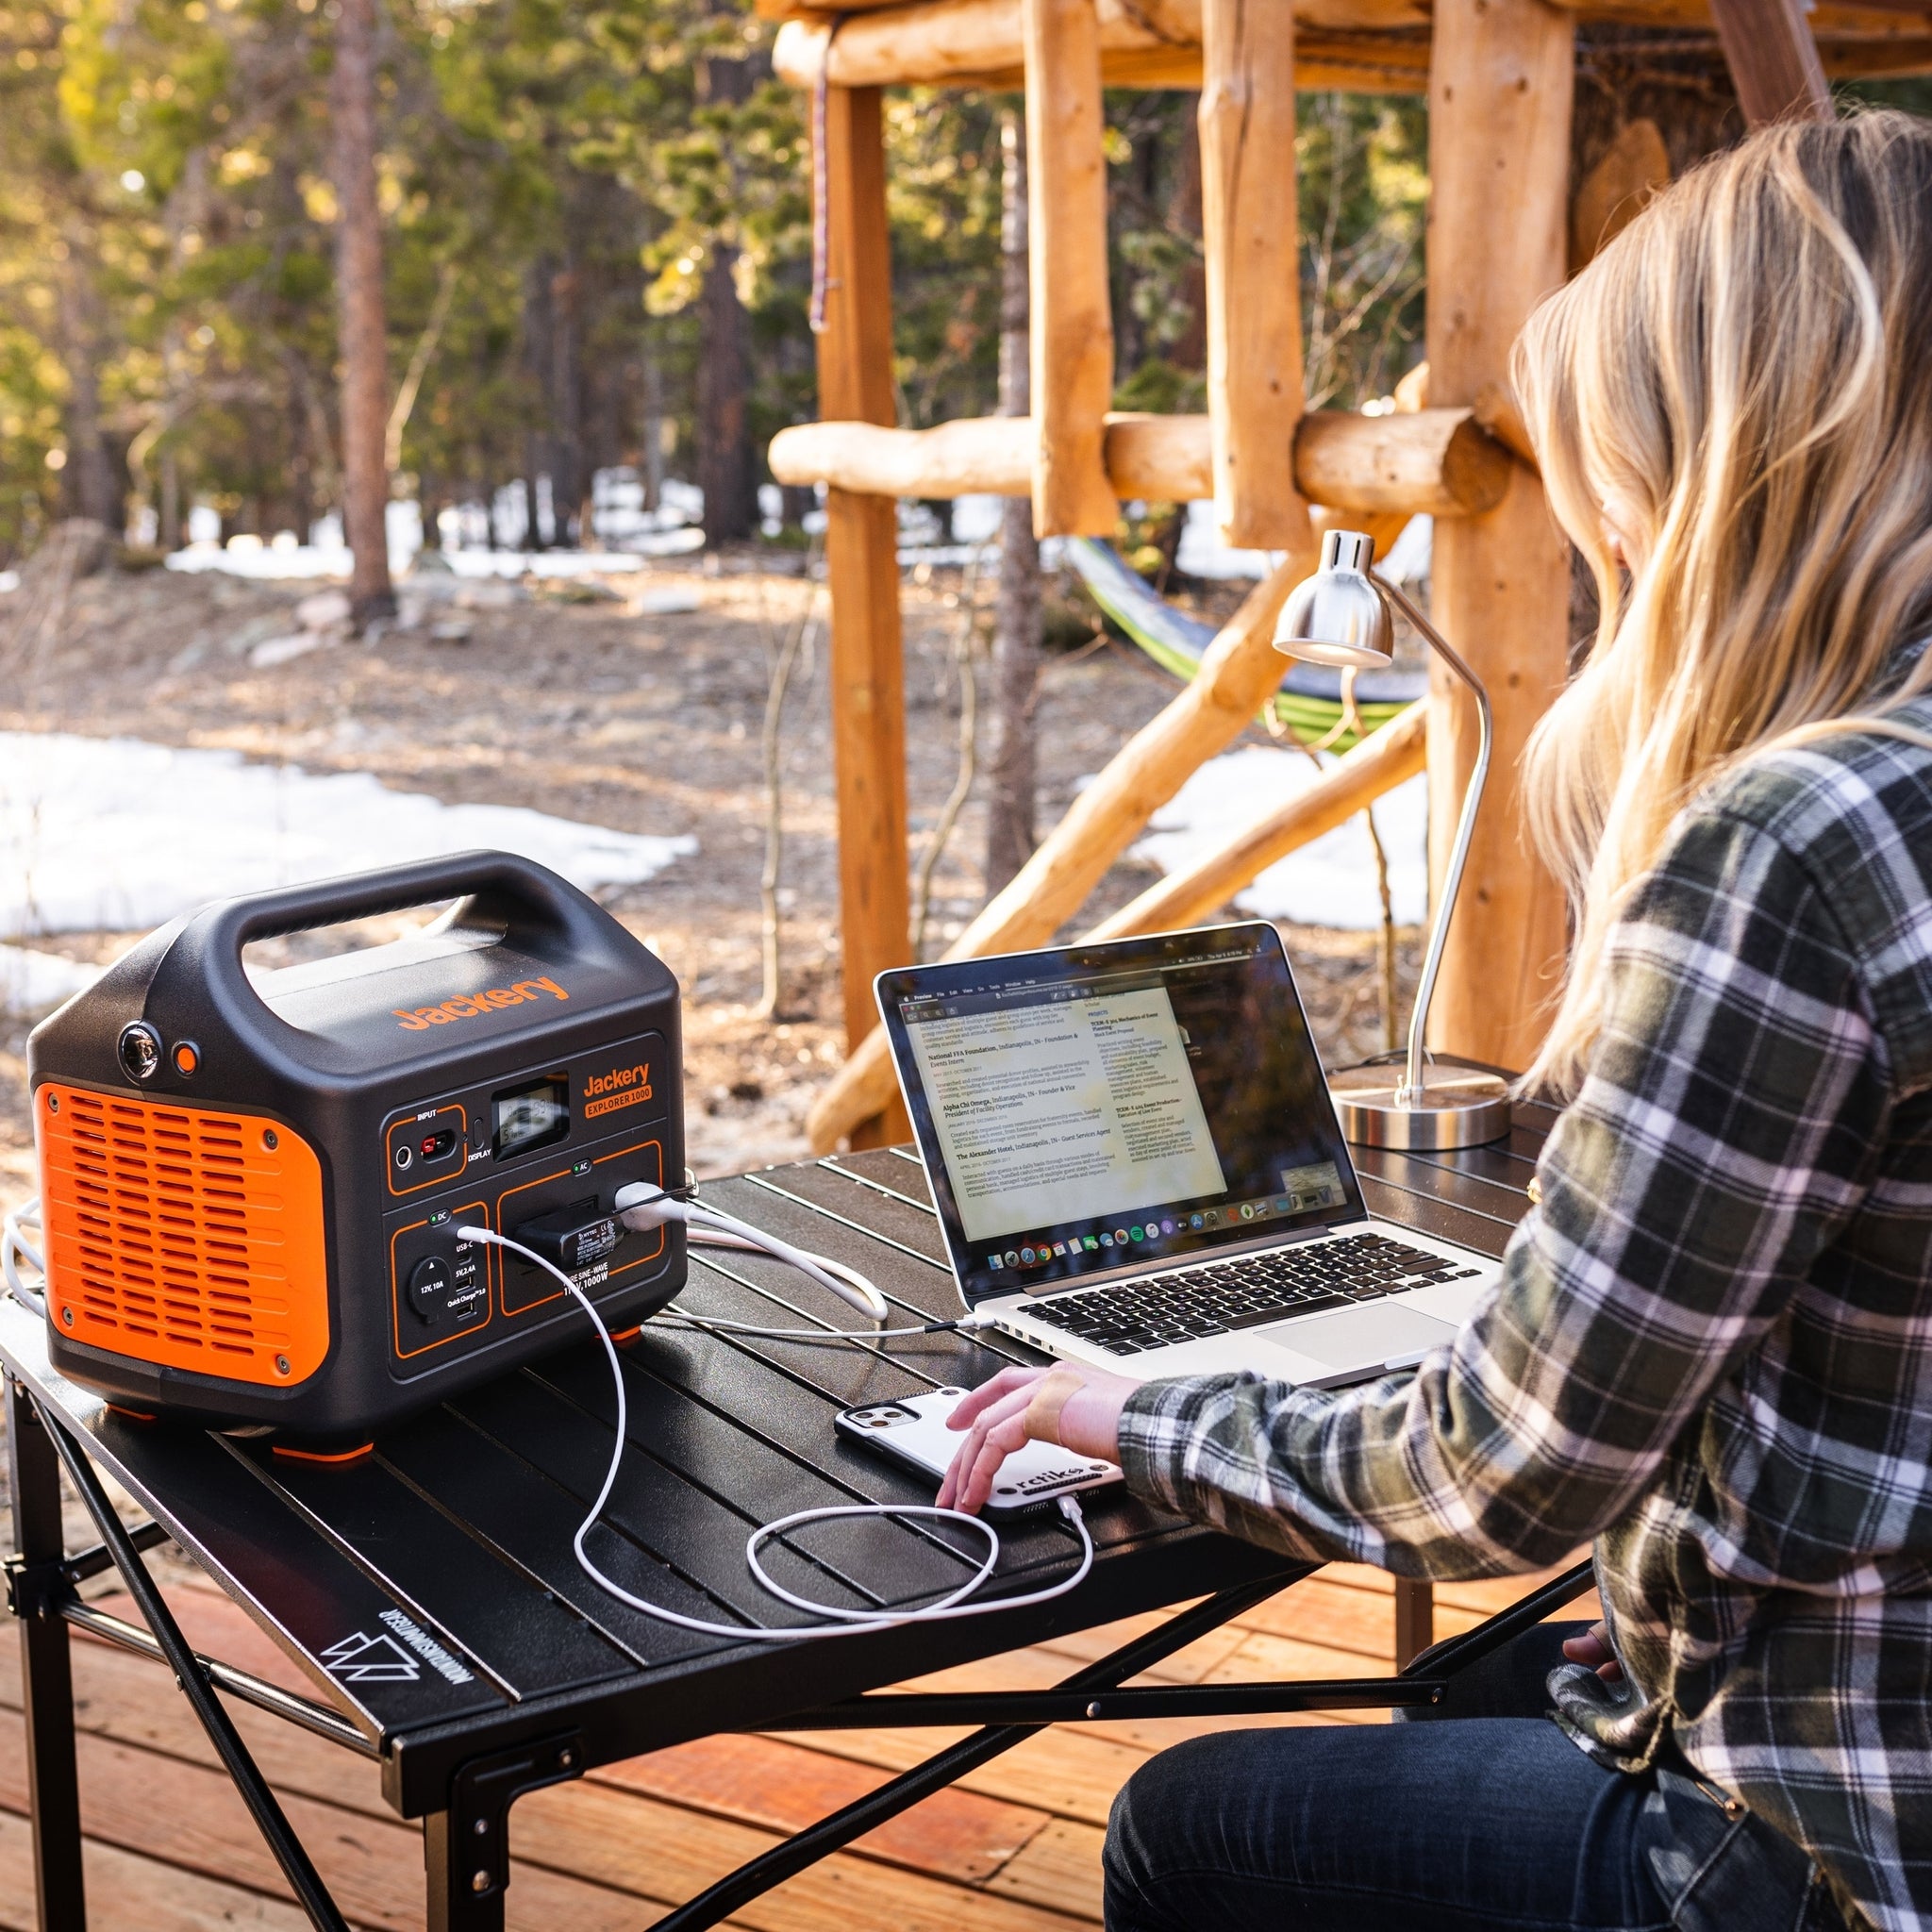 Jackery Explorer 1000 Portable Power Station Charging A Laptop Outdoords